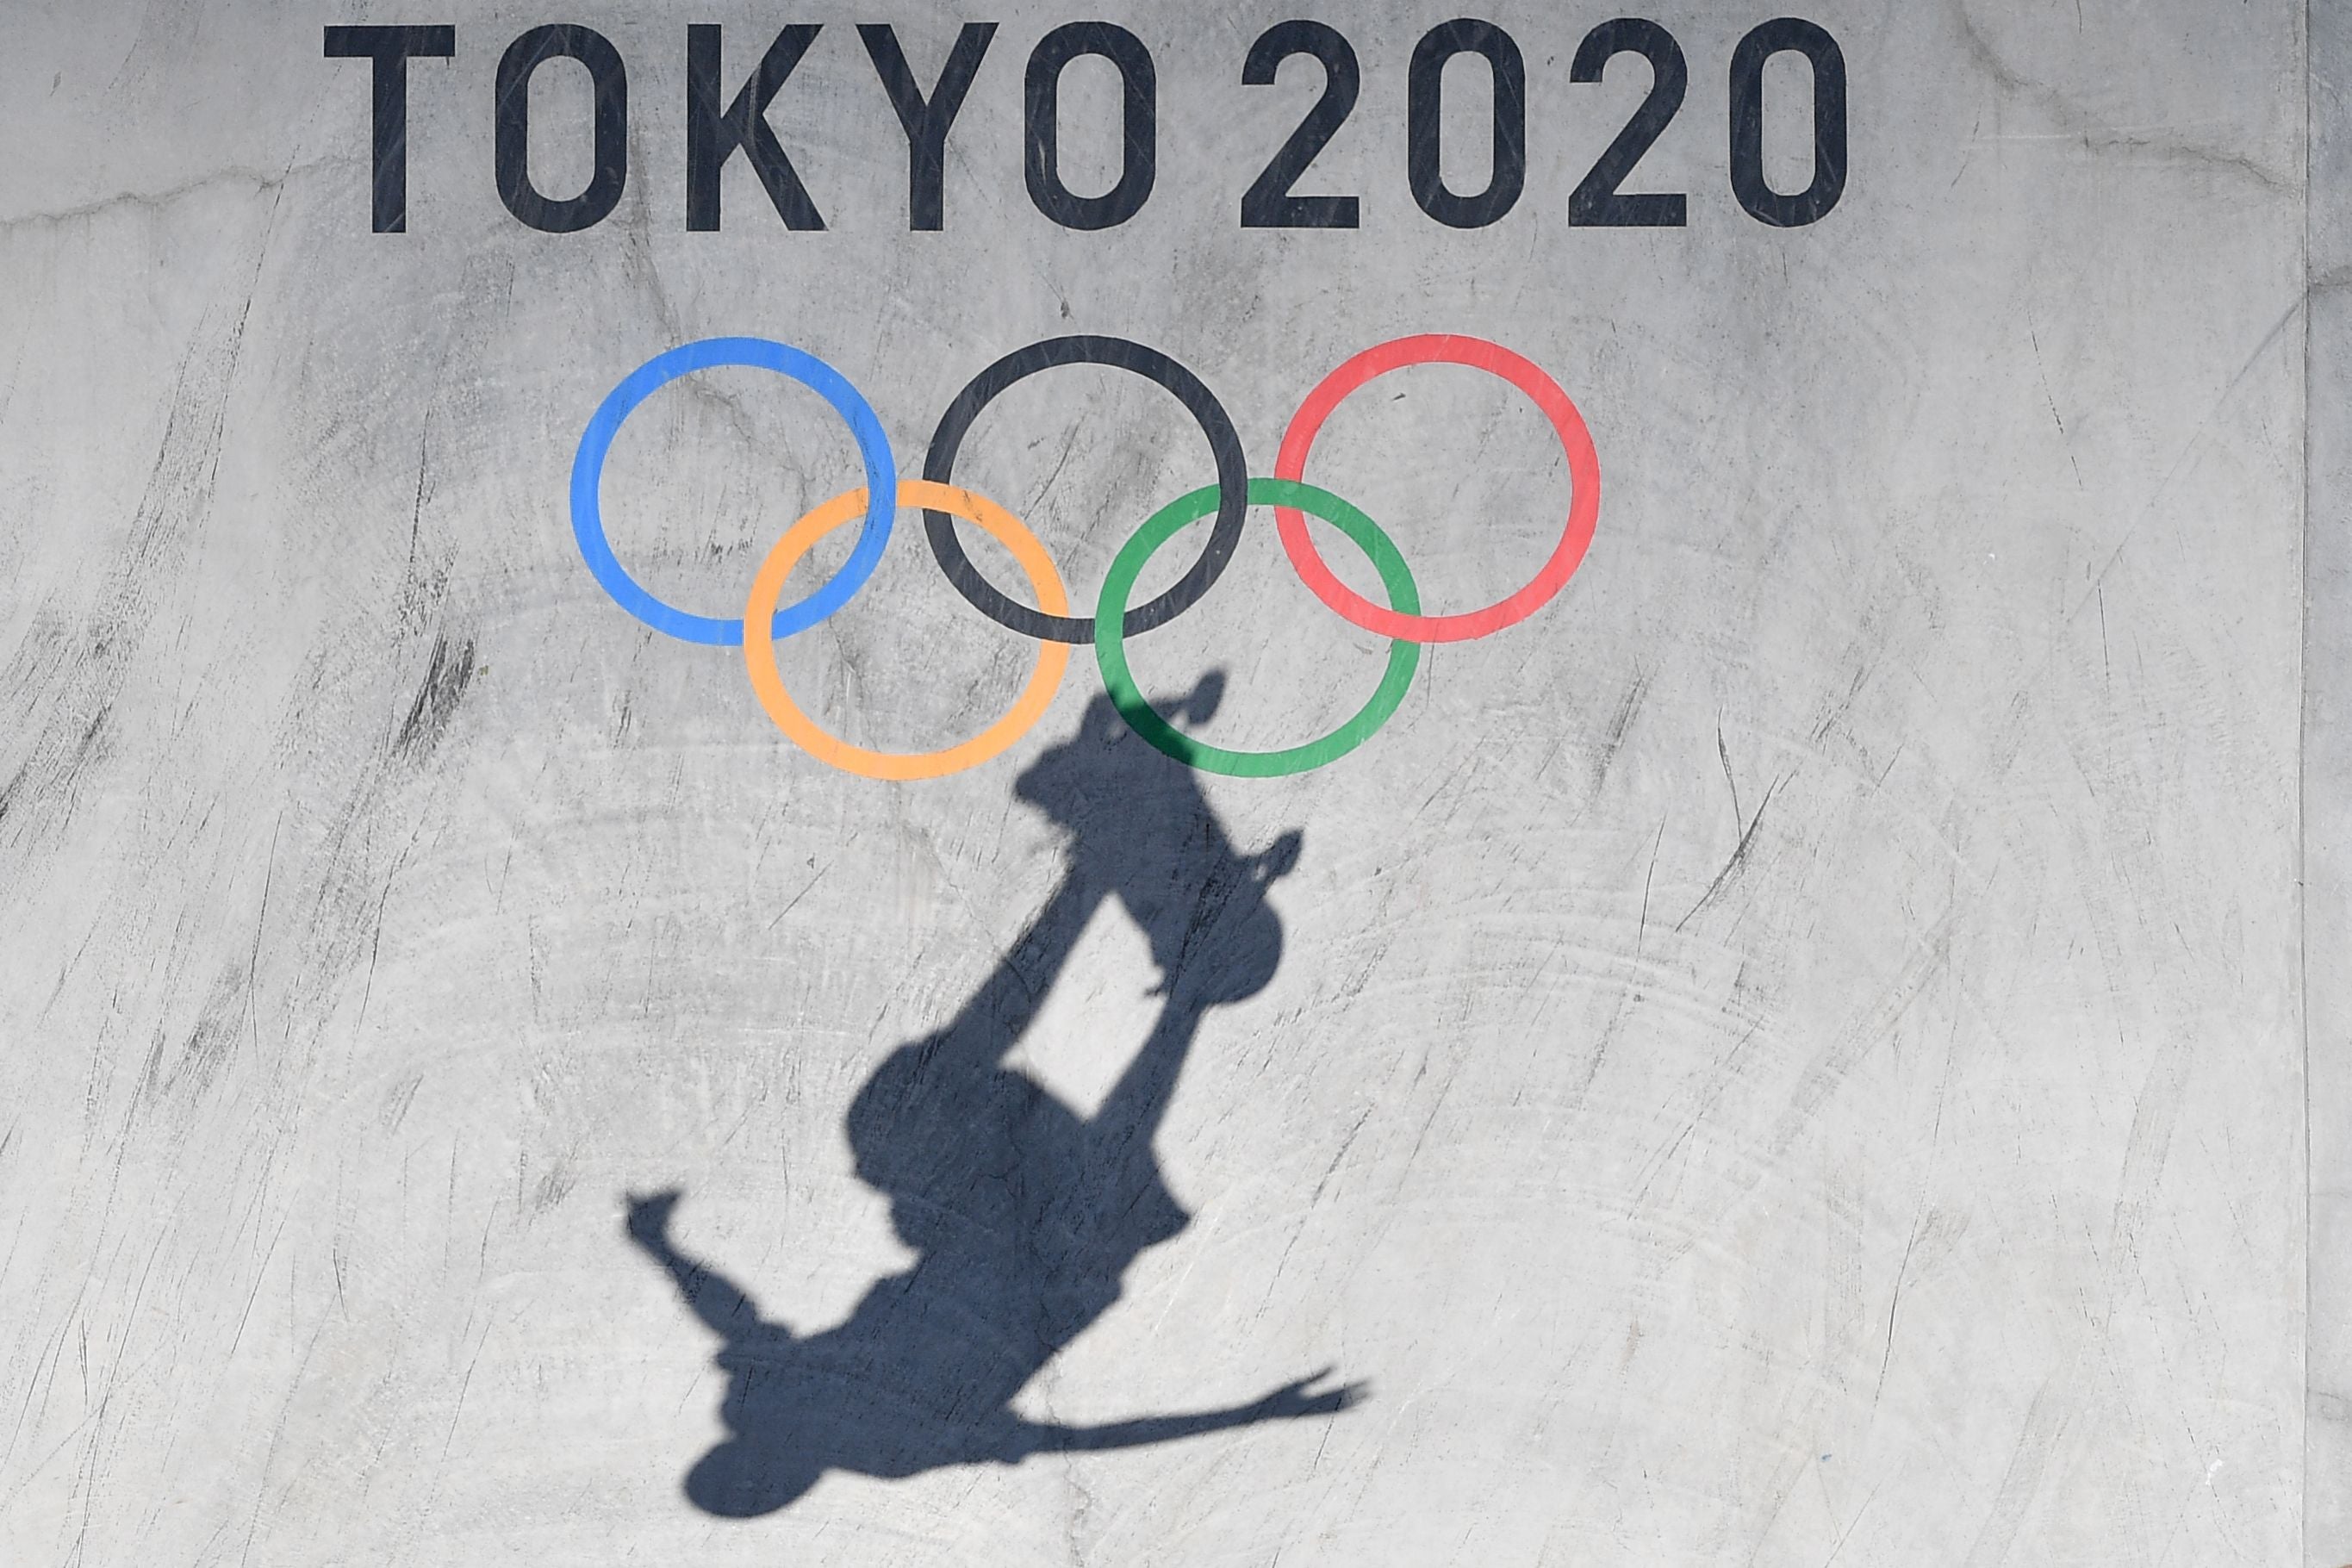 File. A rider competes during the Tokyo 2020 Olympic Games at Ariake Sports Park Skateboarding in Tokyo on 5 August, 2021. - North Korea state television has aired first coverage of the Tokyo Olympic Games two days after the closing ceremony